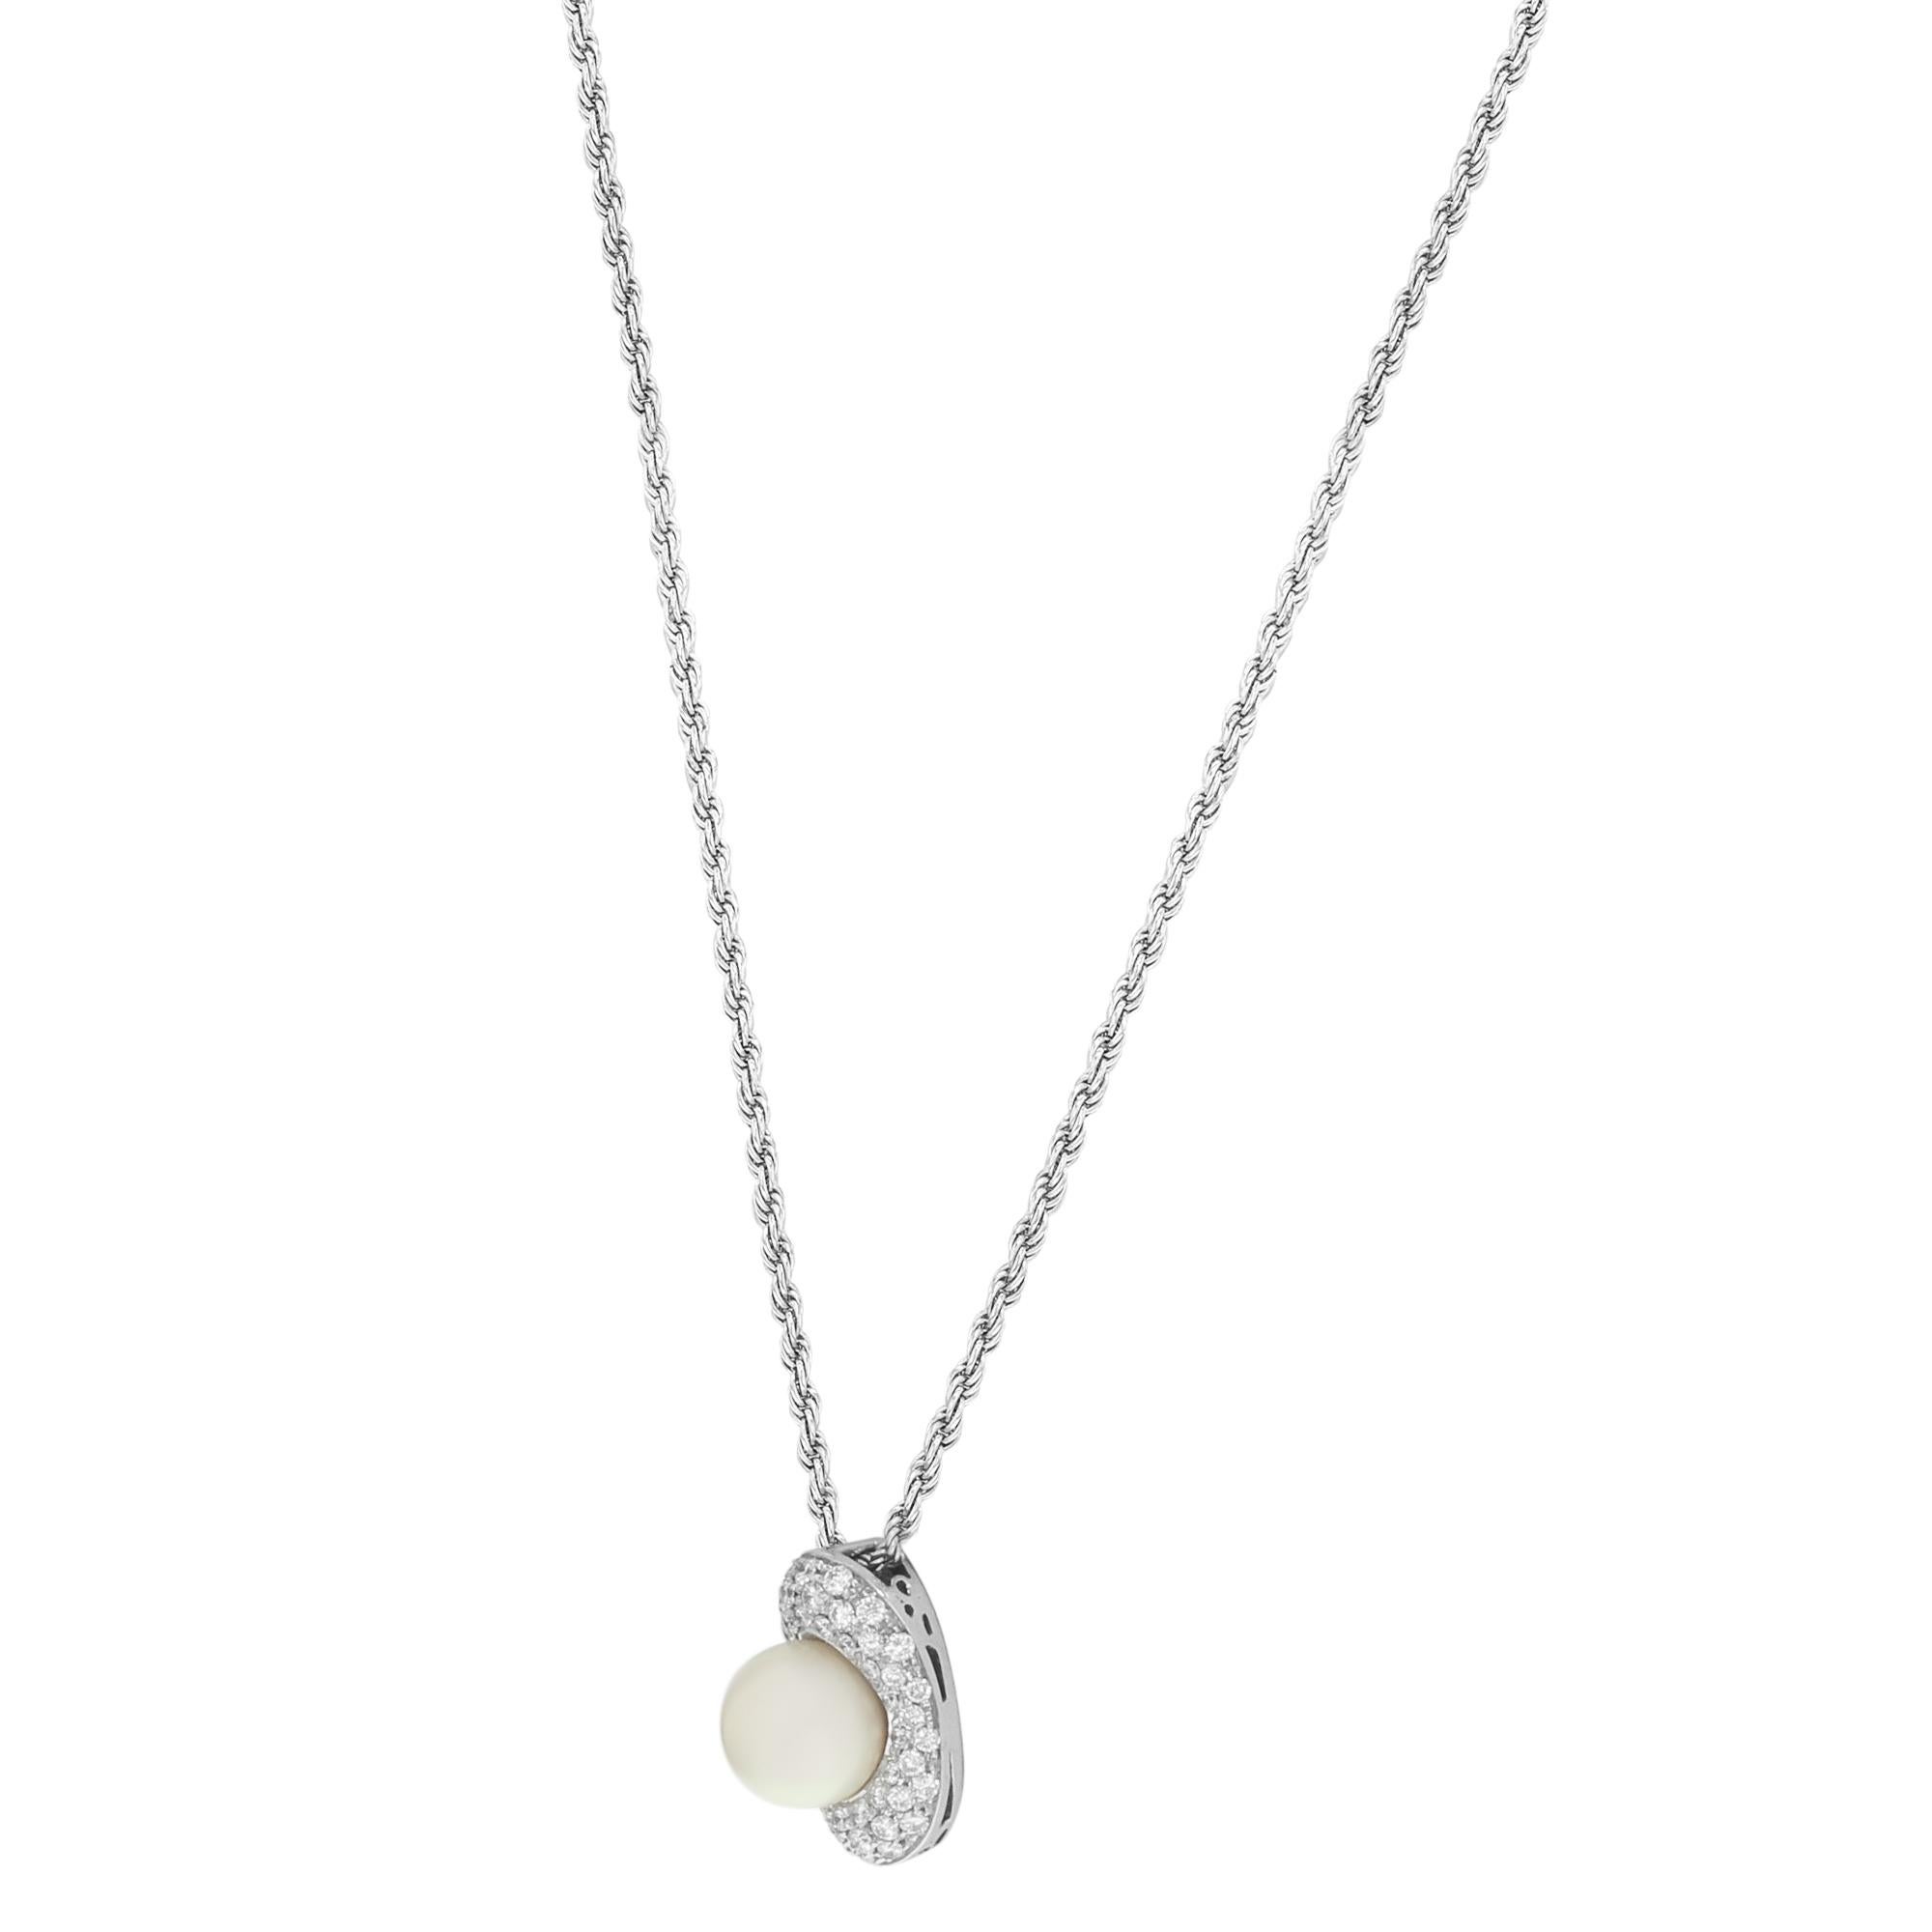 This stunning diamond and pearl pendant necklace is crafted in 18k white gold and encrusted with 0.65 carat diamonds & pearl. Length of the necklace is 18.75